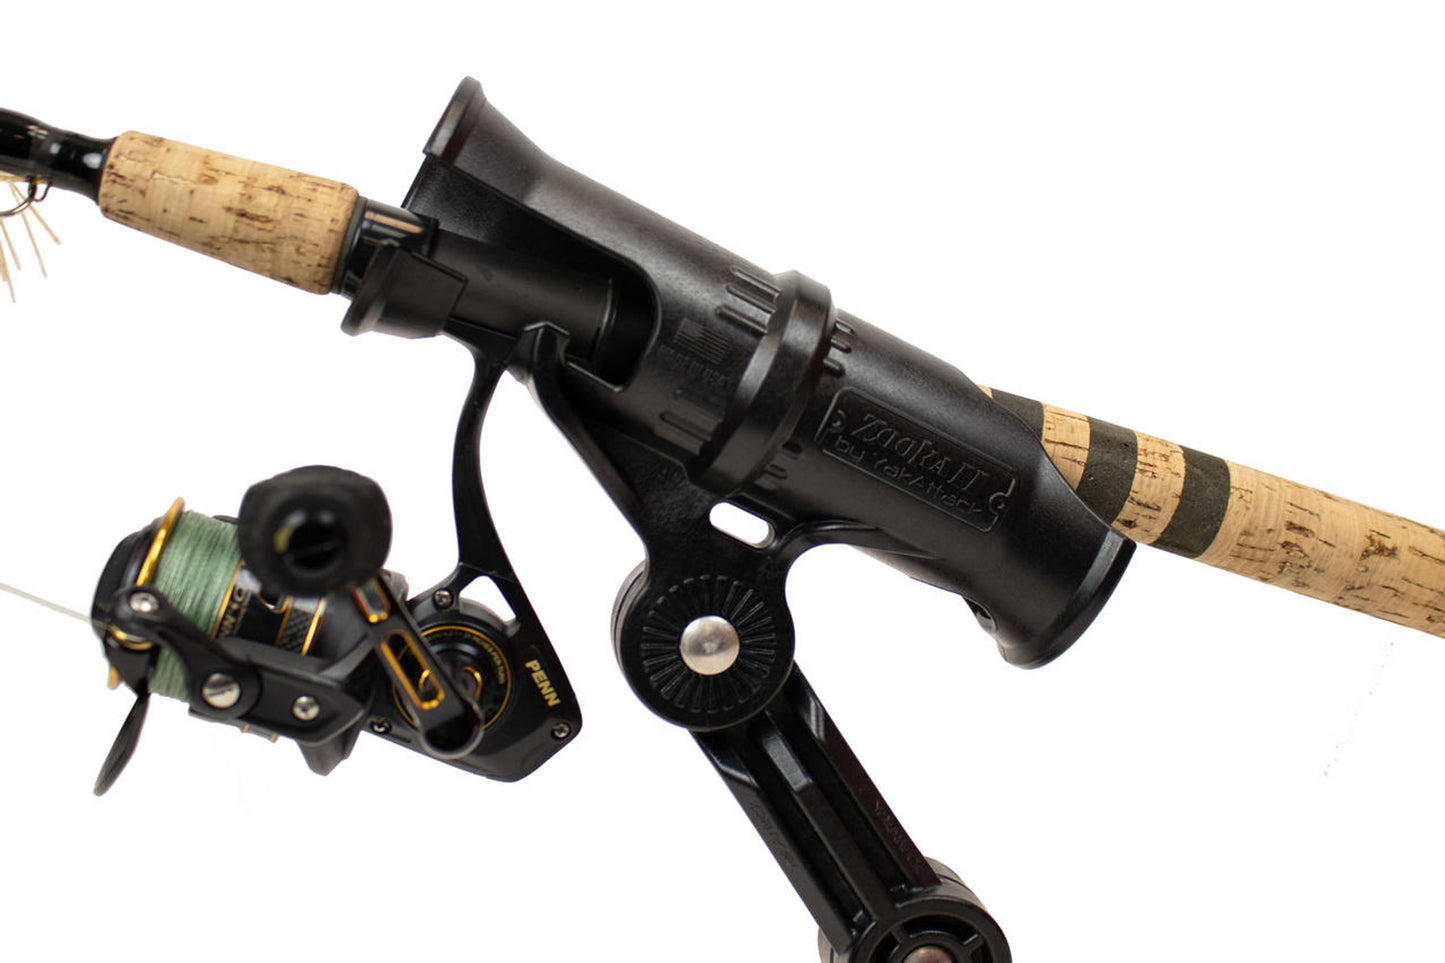 Yak Attack Zooka II™ Rod Holder with Track Mounted LockNLoad™ Mounting System